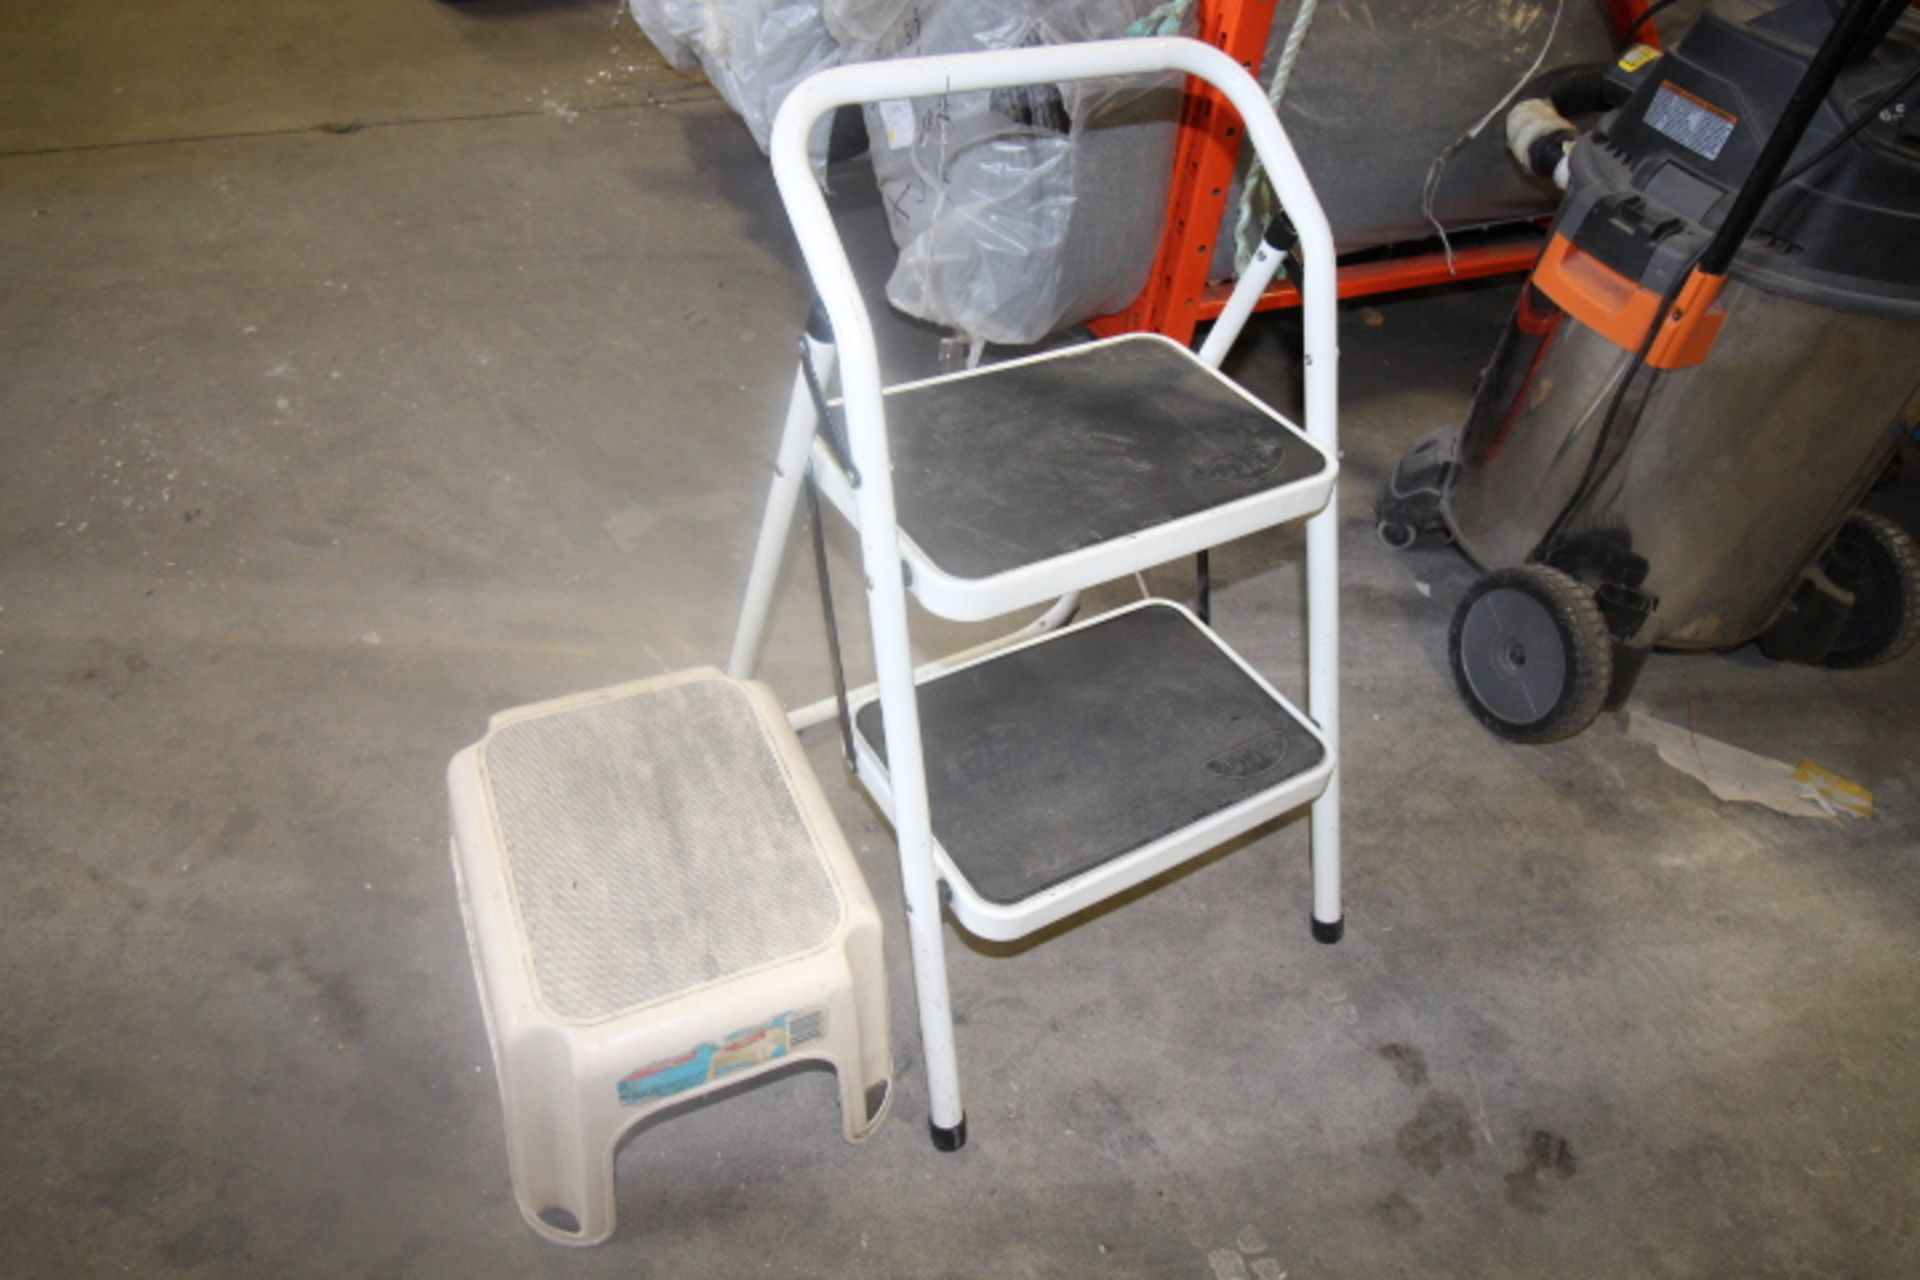 Lot of 2 Step Stools (1) 2 step and (1) 1 step